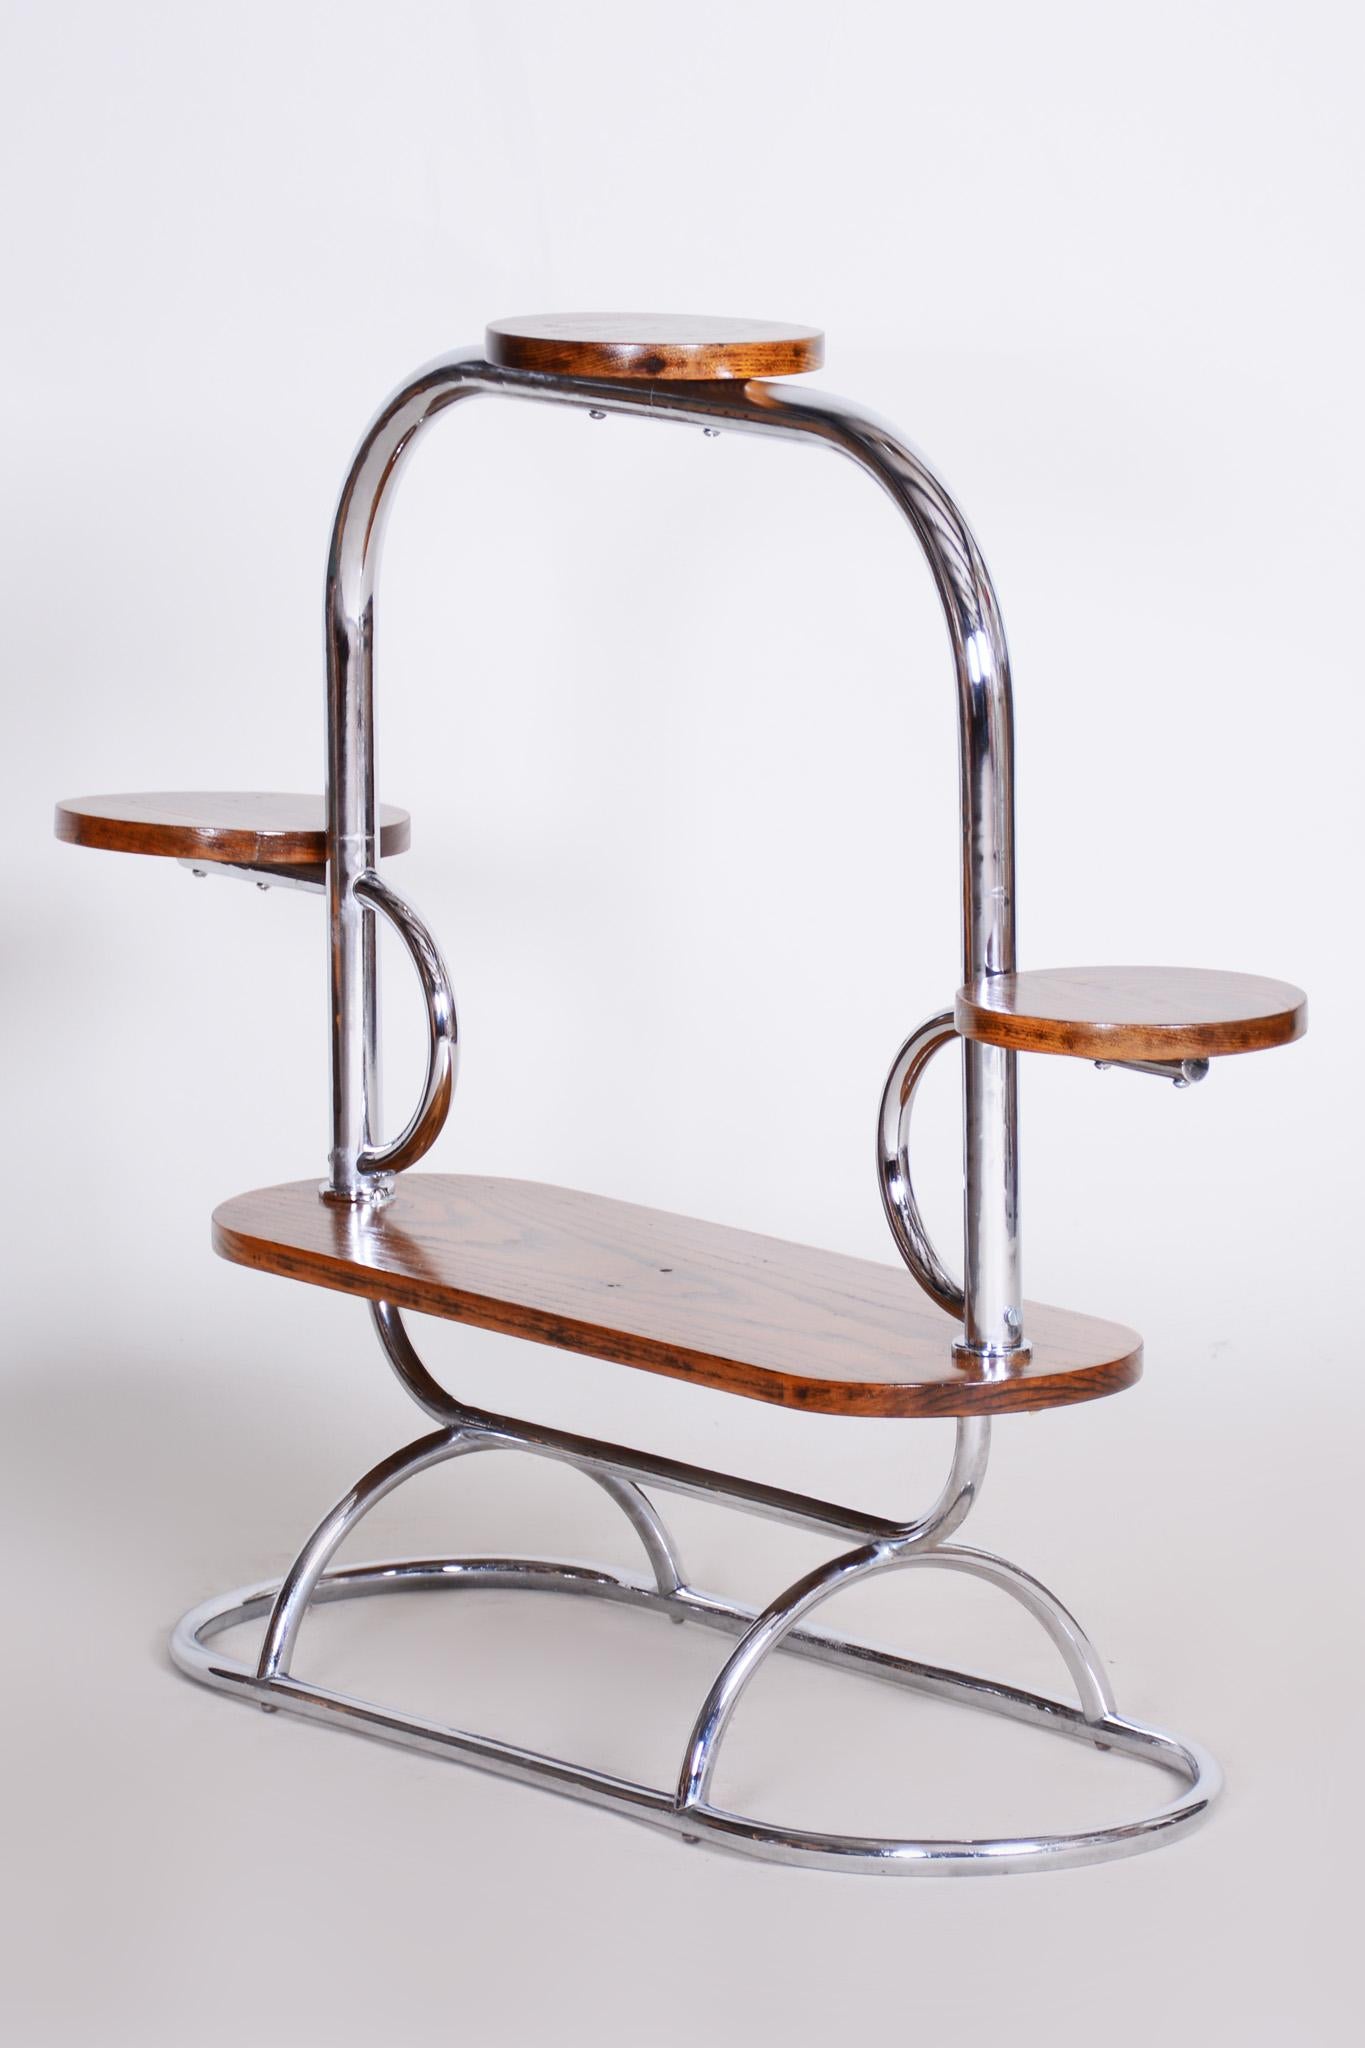 20th Century Czech Bauhaus Chrome Flower Stand Made Out of Oak, Lacquered, 1930s For Sale